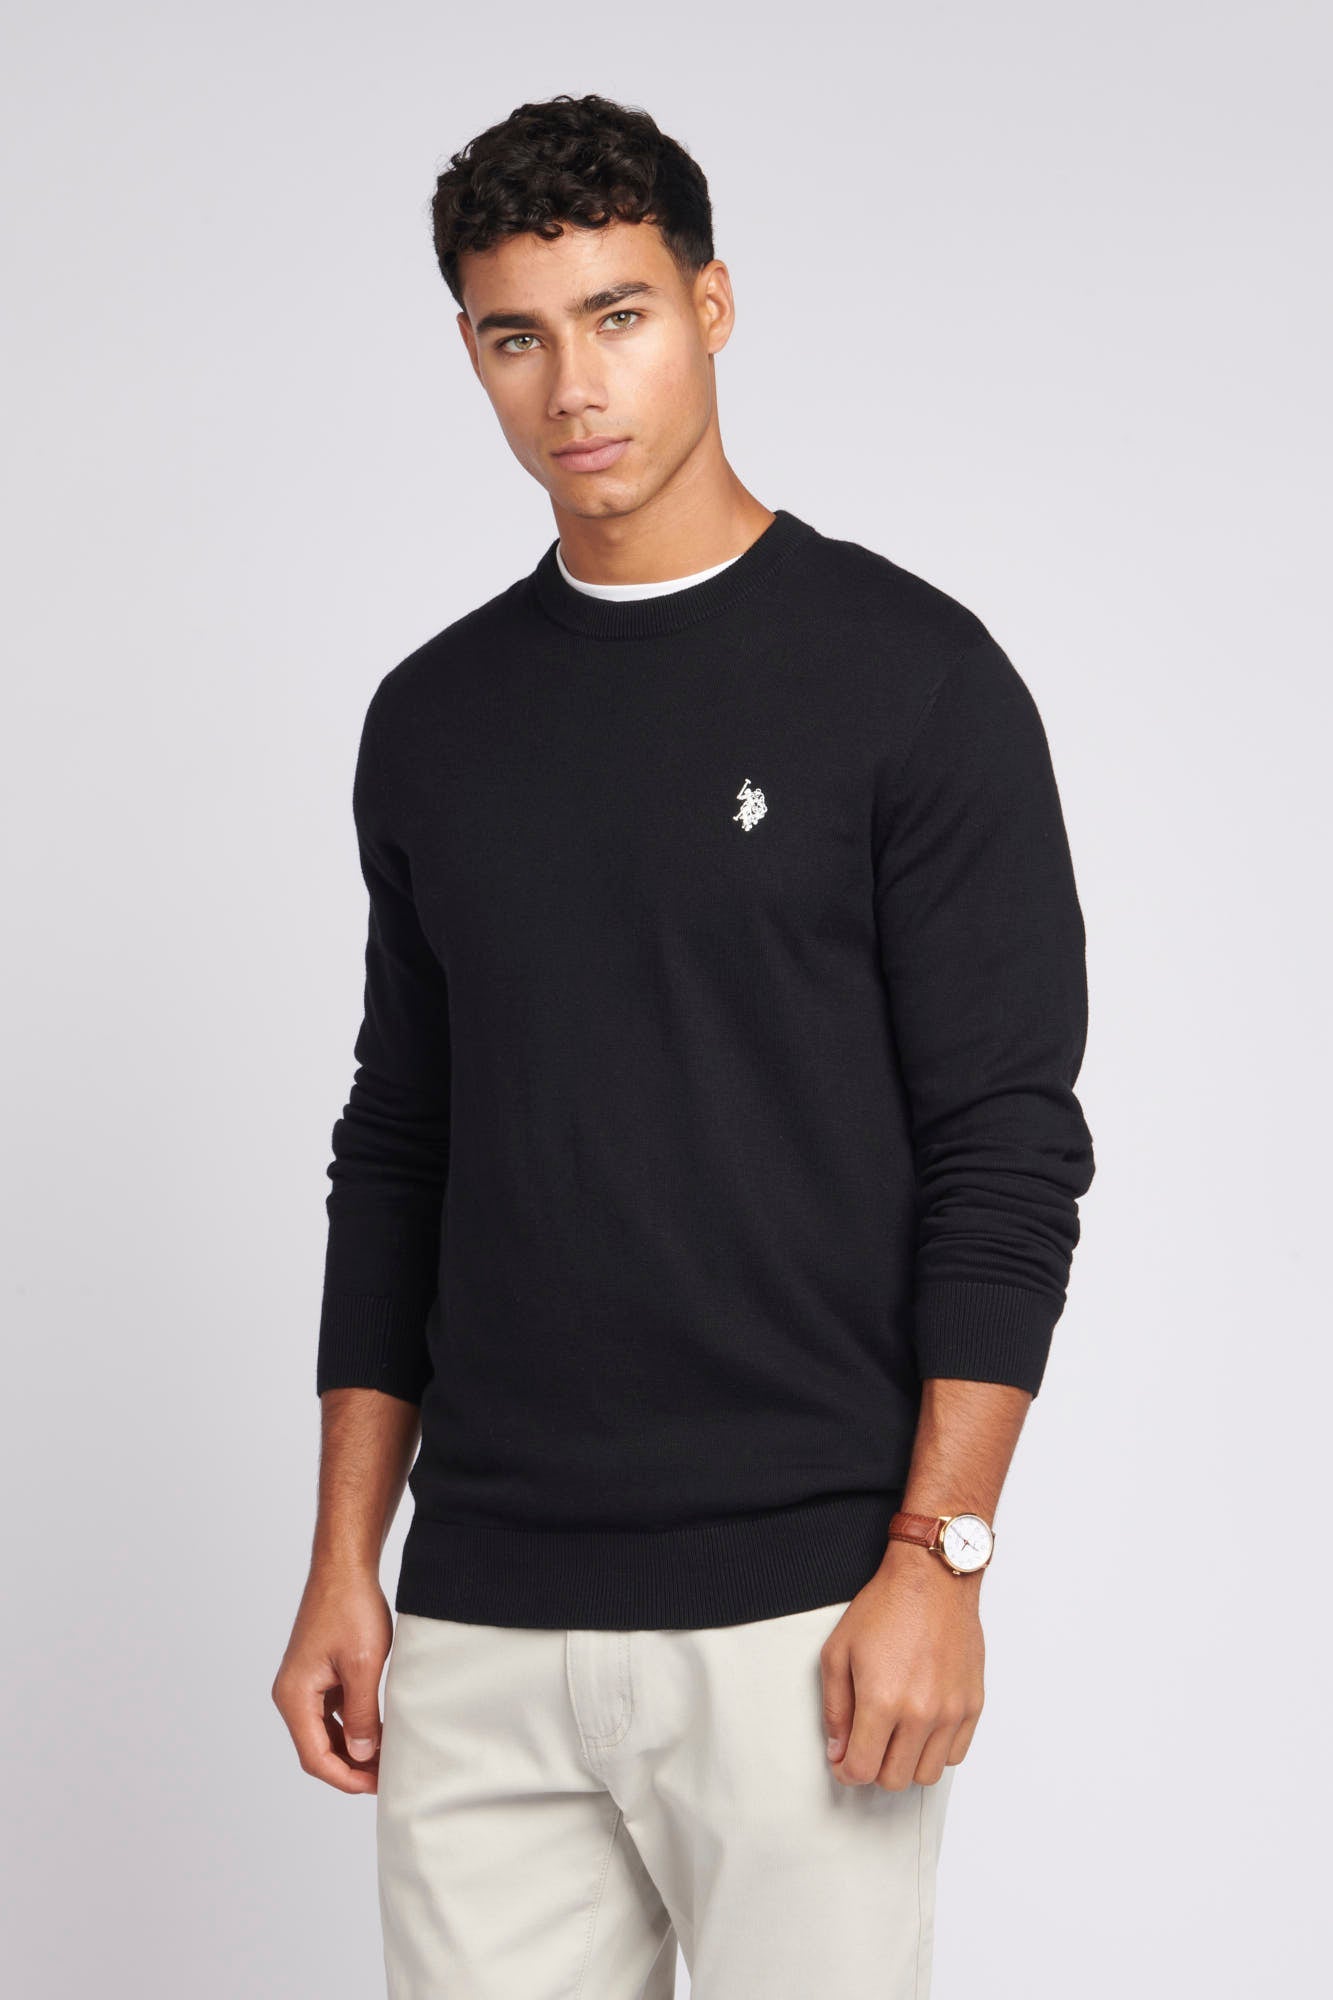 U.S. Polo Assn. Mens Cotton Crew Neck Jumper in Black Steeple Grey DHM